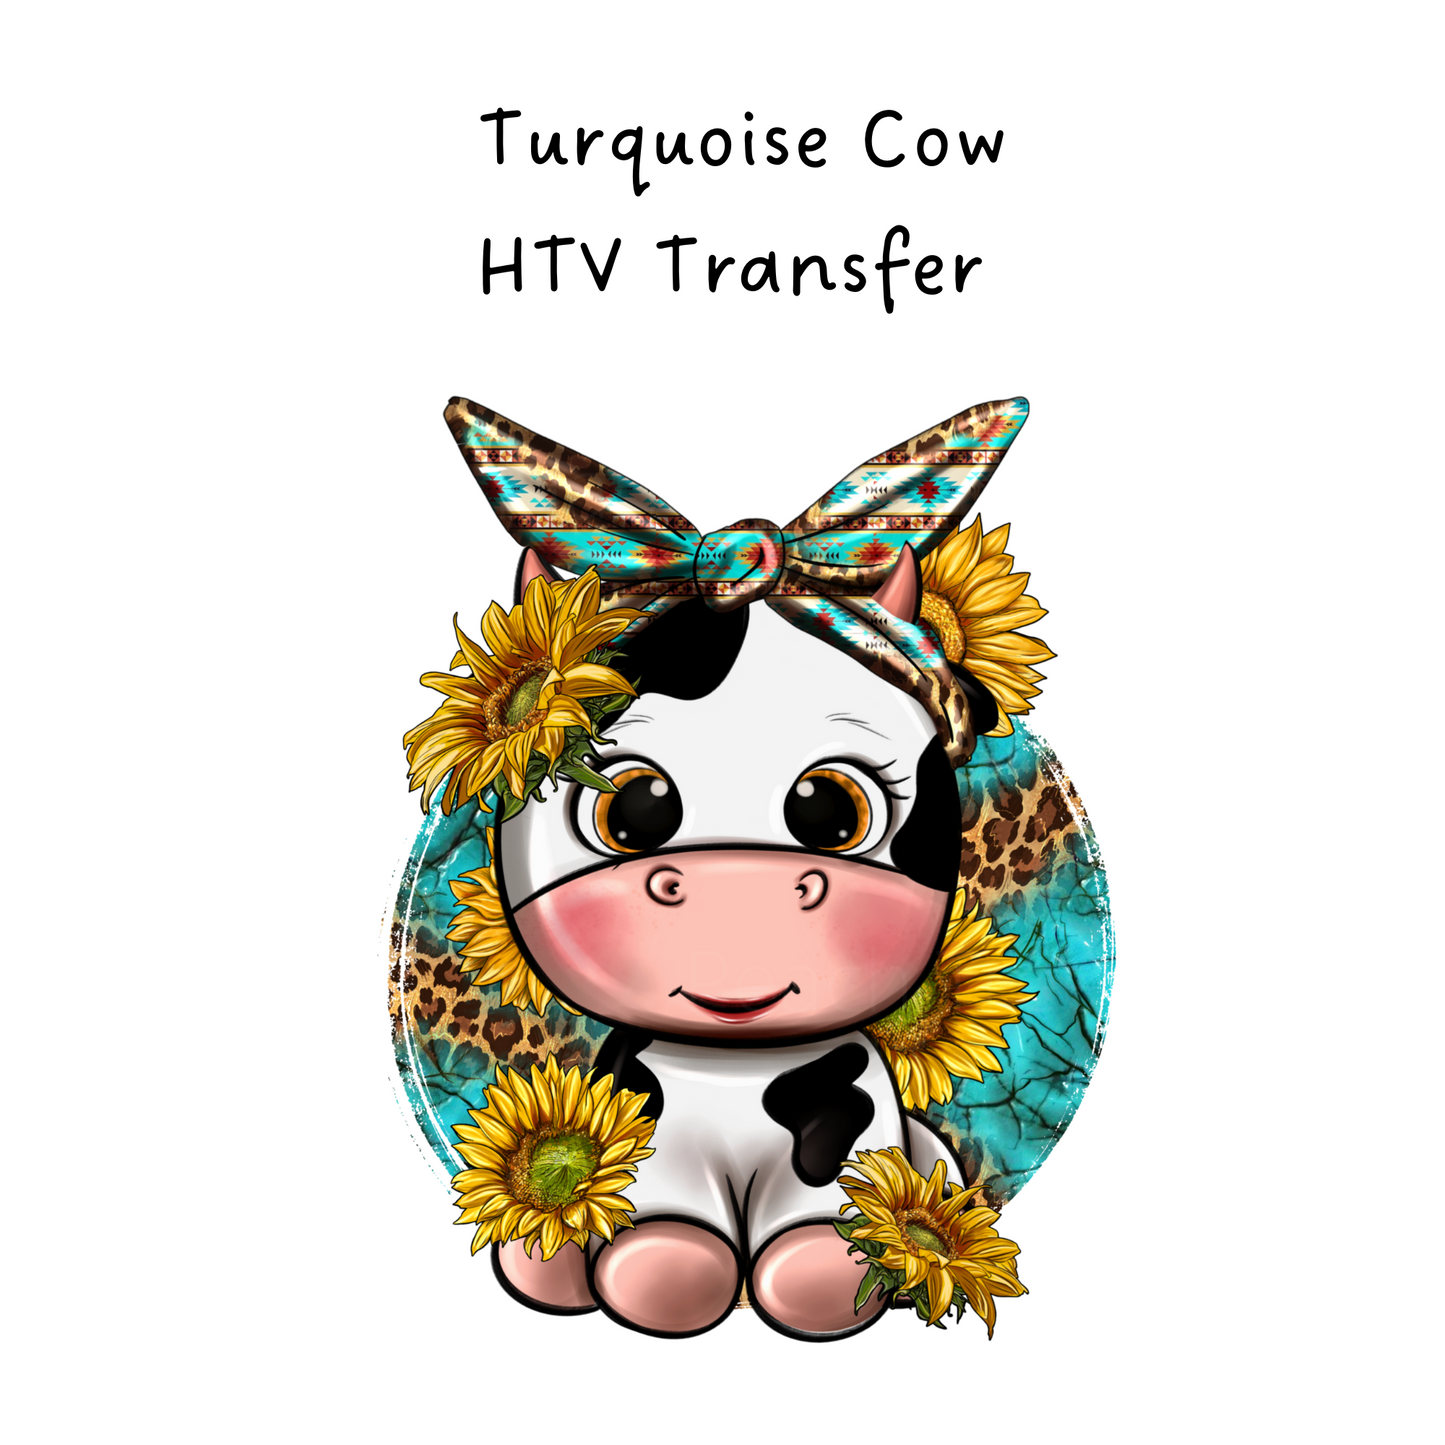 Turquoise Cow HTV Transfer